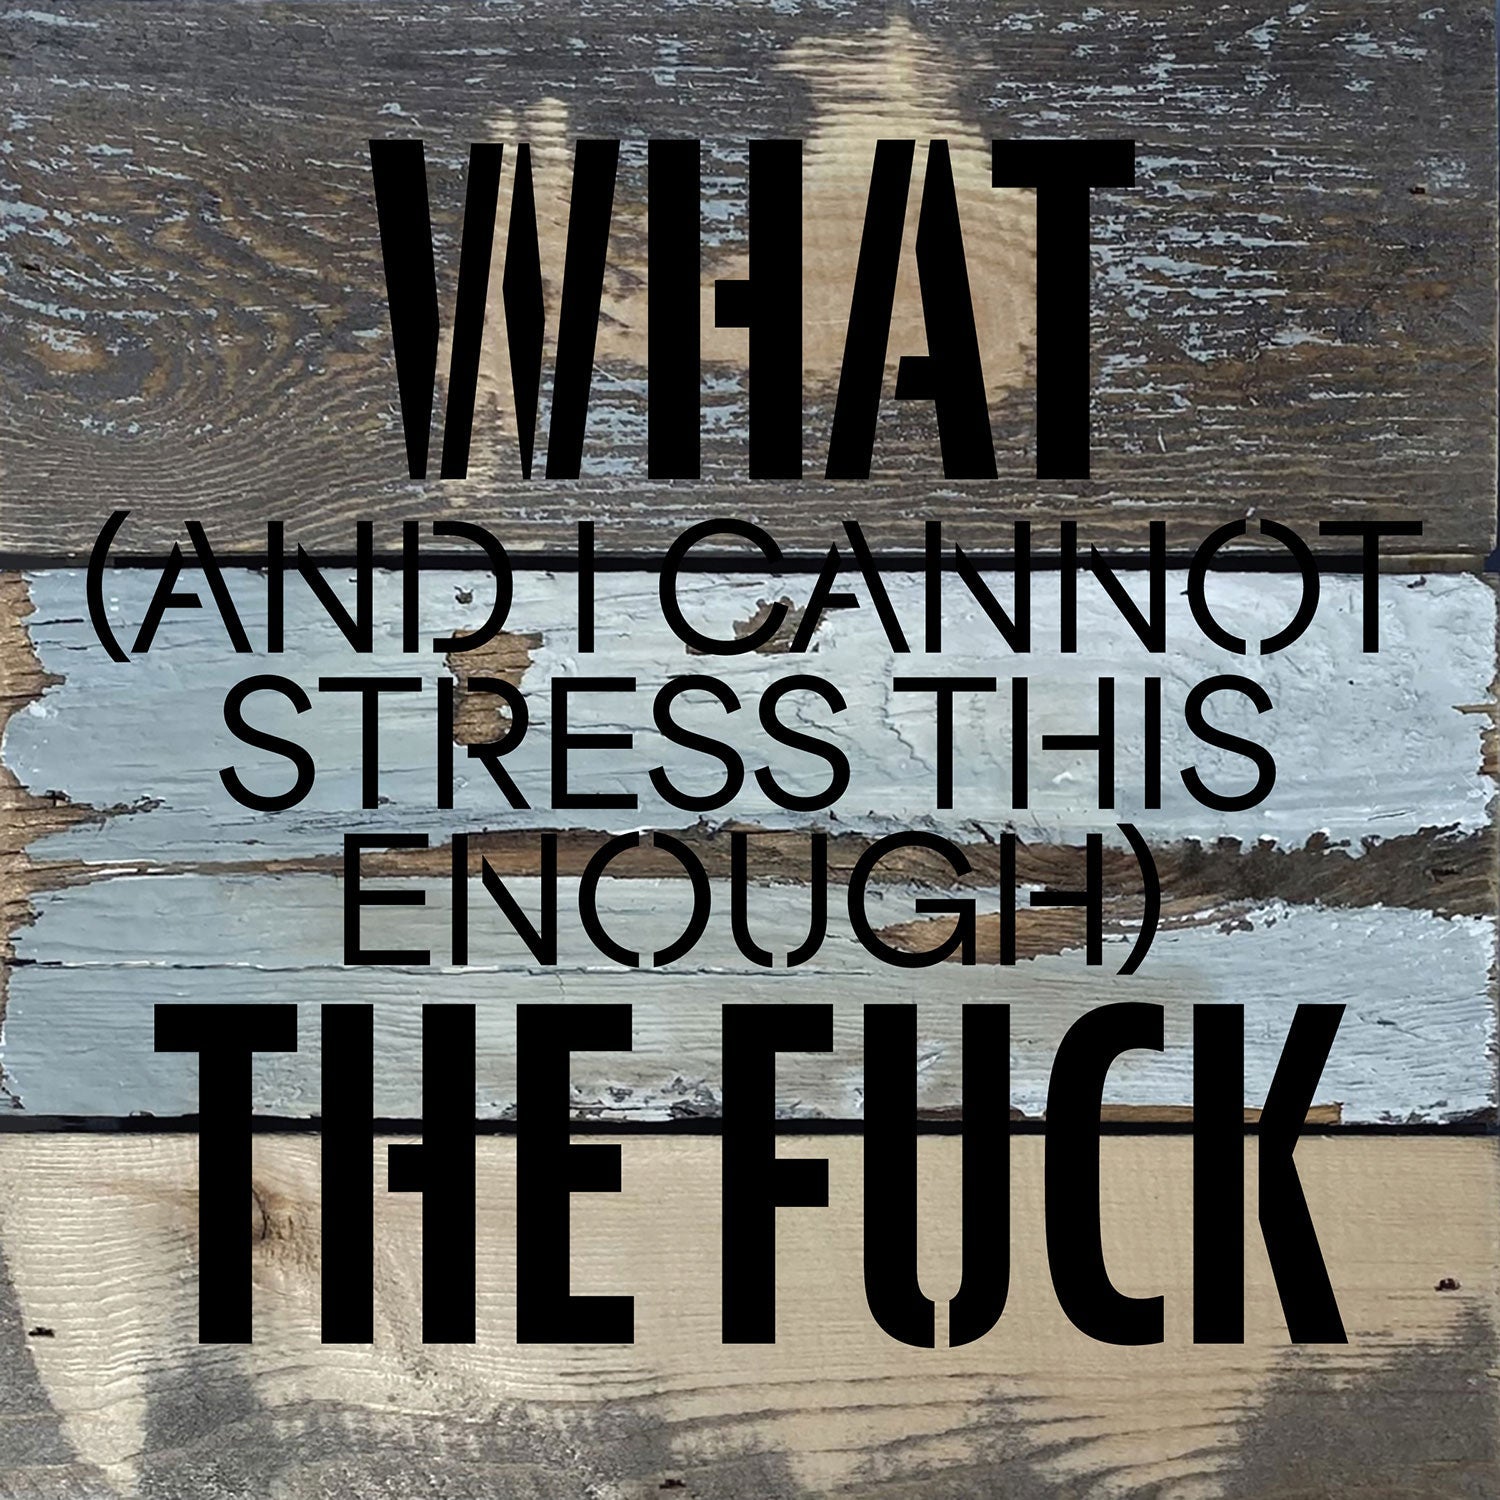 What (and I cannot stress this enough) the Fuck? / 8x8 Blue Whisper Reclaimed Wood Wall Decor